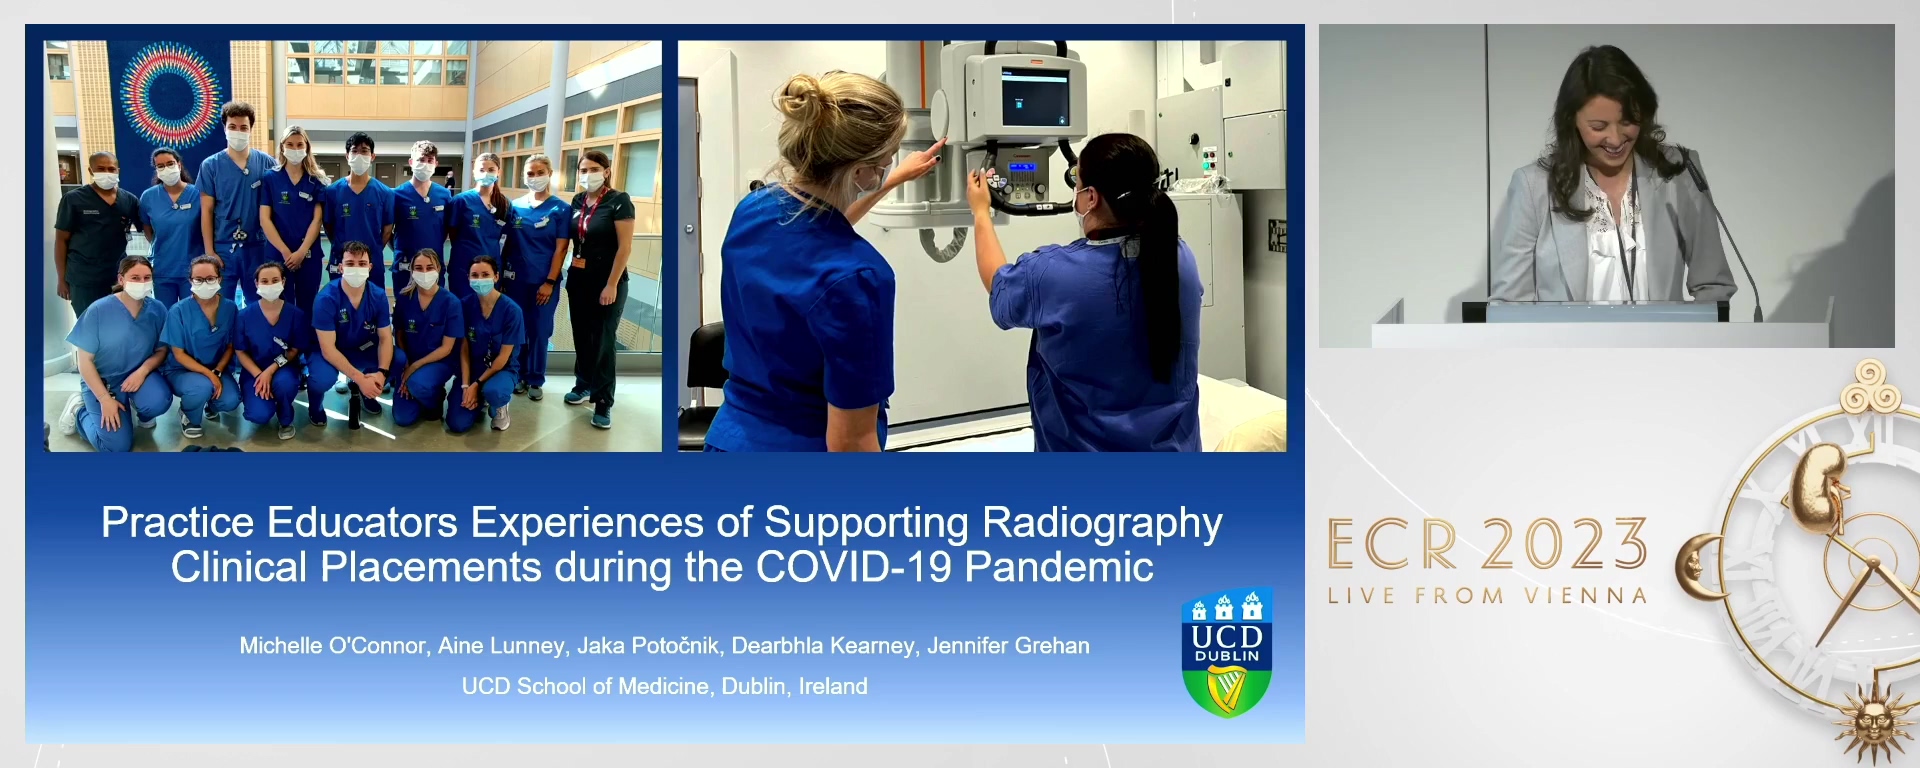 Practice educators' experiences of supporting radiography clinical placements during the COVID-19 pandemic - Michelle O'Connor, Dublin / IE